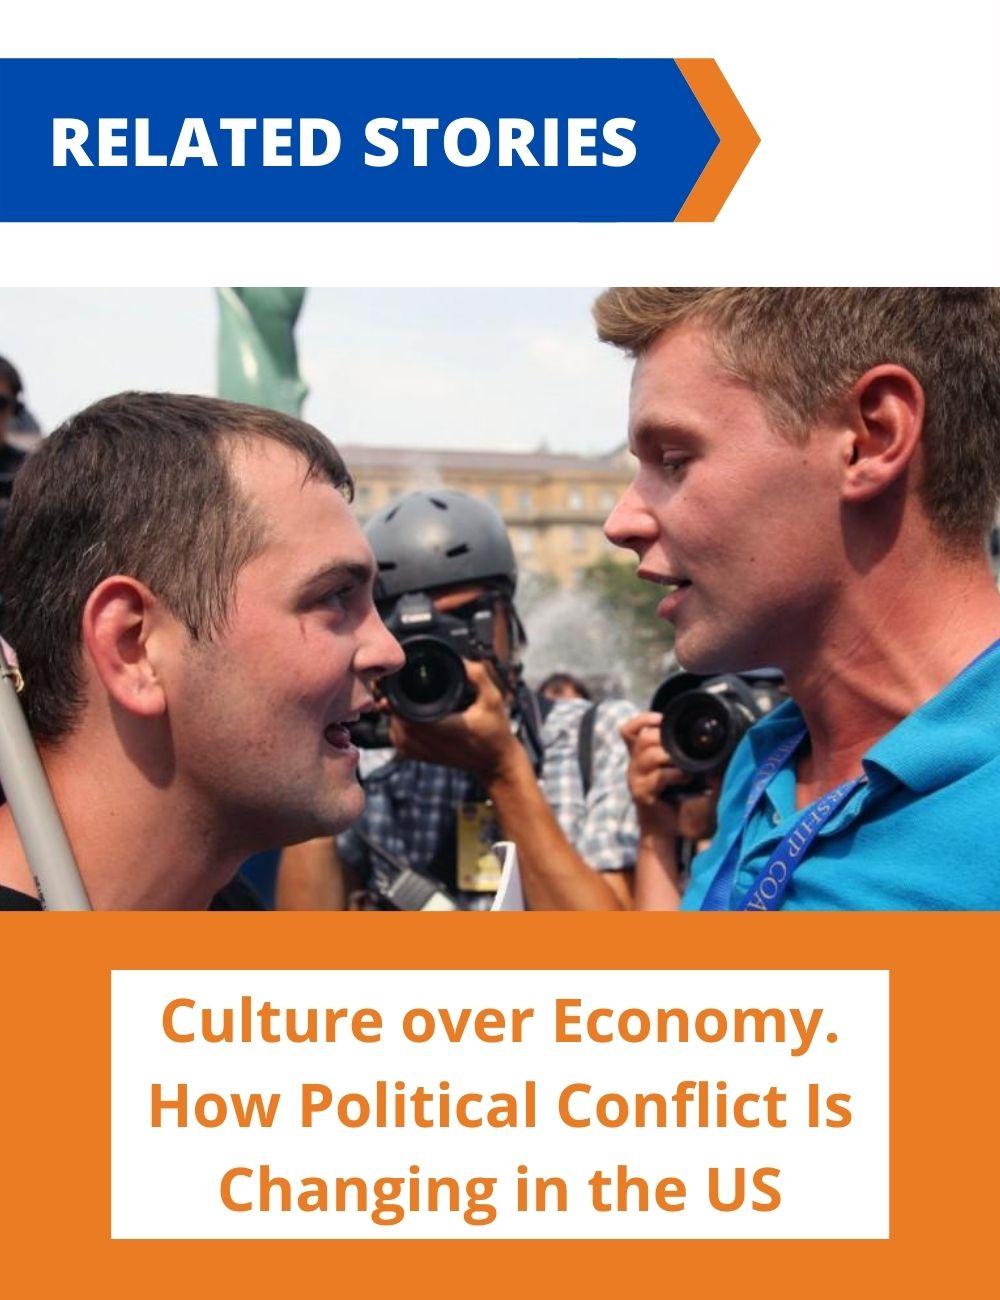 Image: two men in a discussion. Link to related stories. Story headline: Culture over economy. How political conflict is changing in the US.